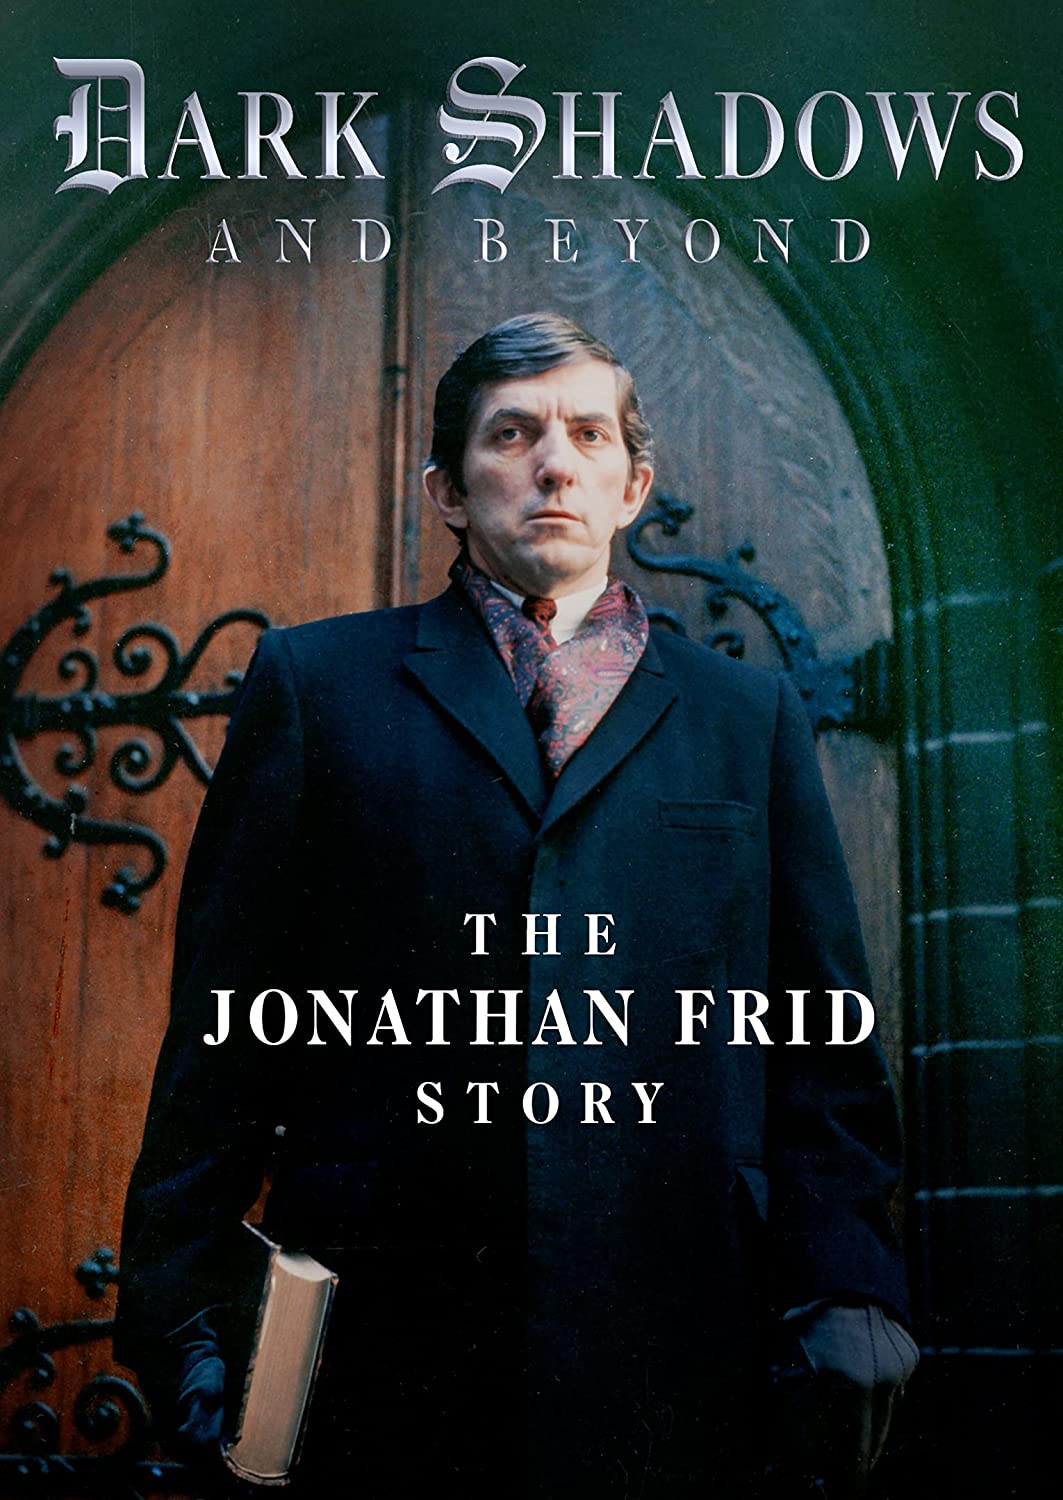 Dark Shadows and Beyond: The Jonathan Frid Story (DVD), Mpi Home Video, Documentary - image 2 of 2